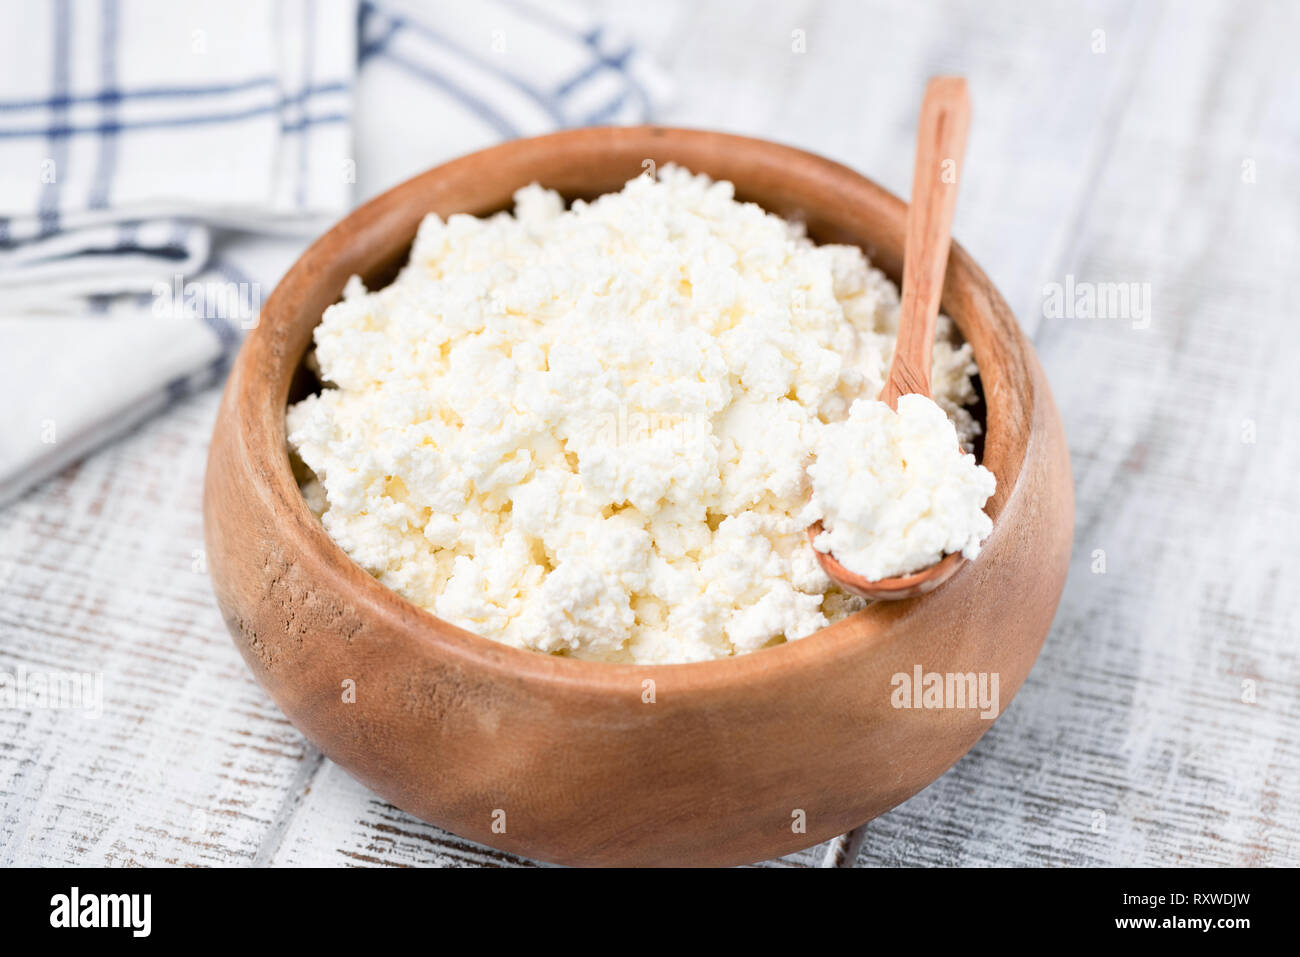 Cottage cheese or tvorog in wooden bowl on white background. Rich in Calcium dairy product for sporty healthy lifestyle Stock Photo